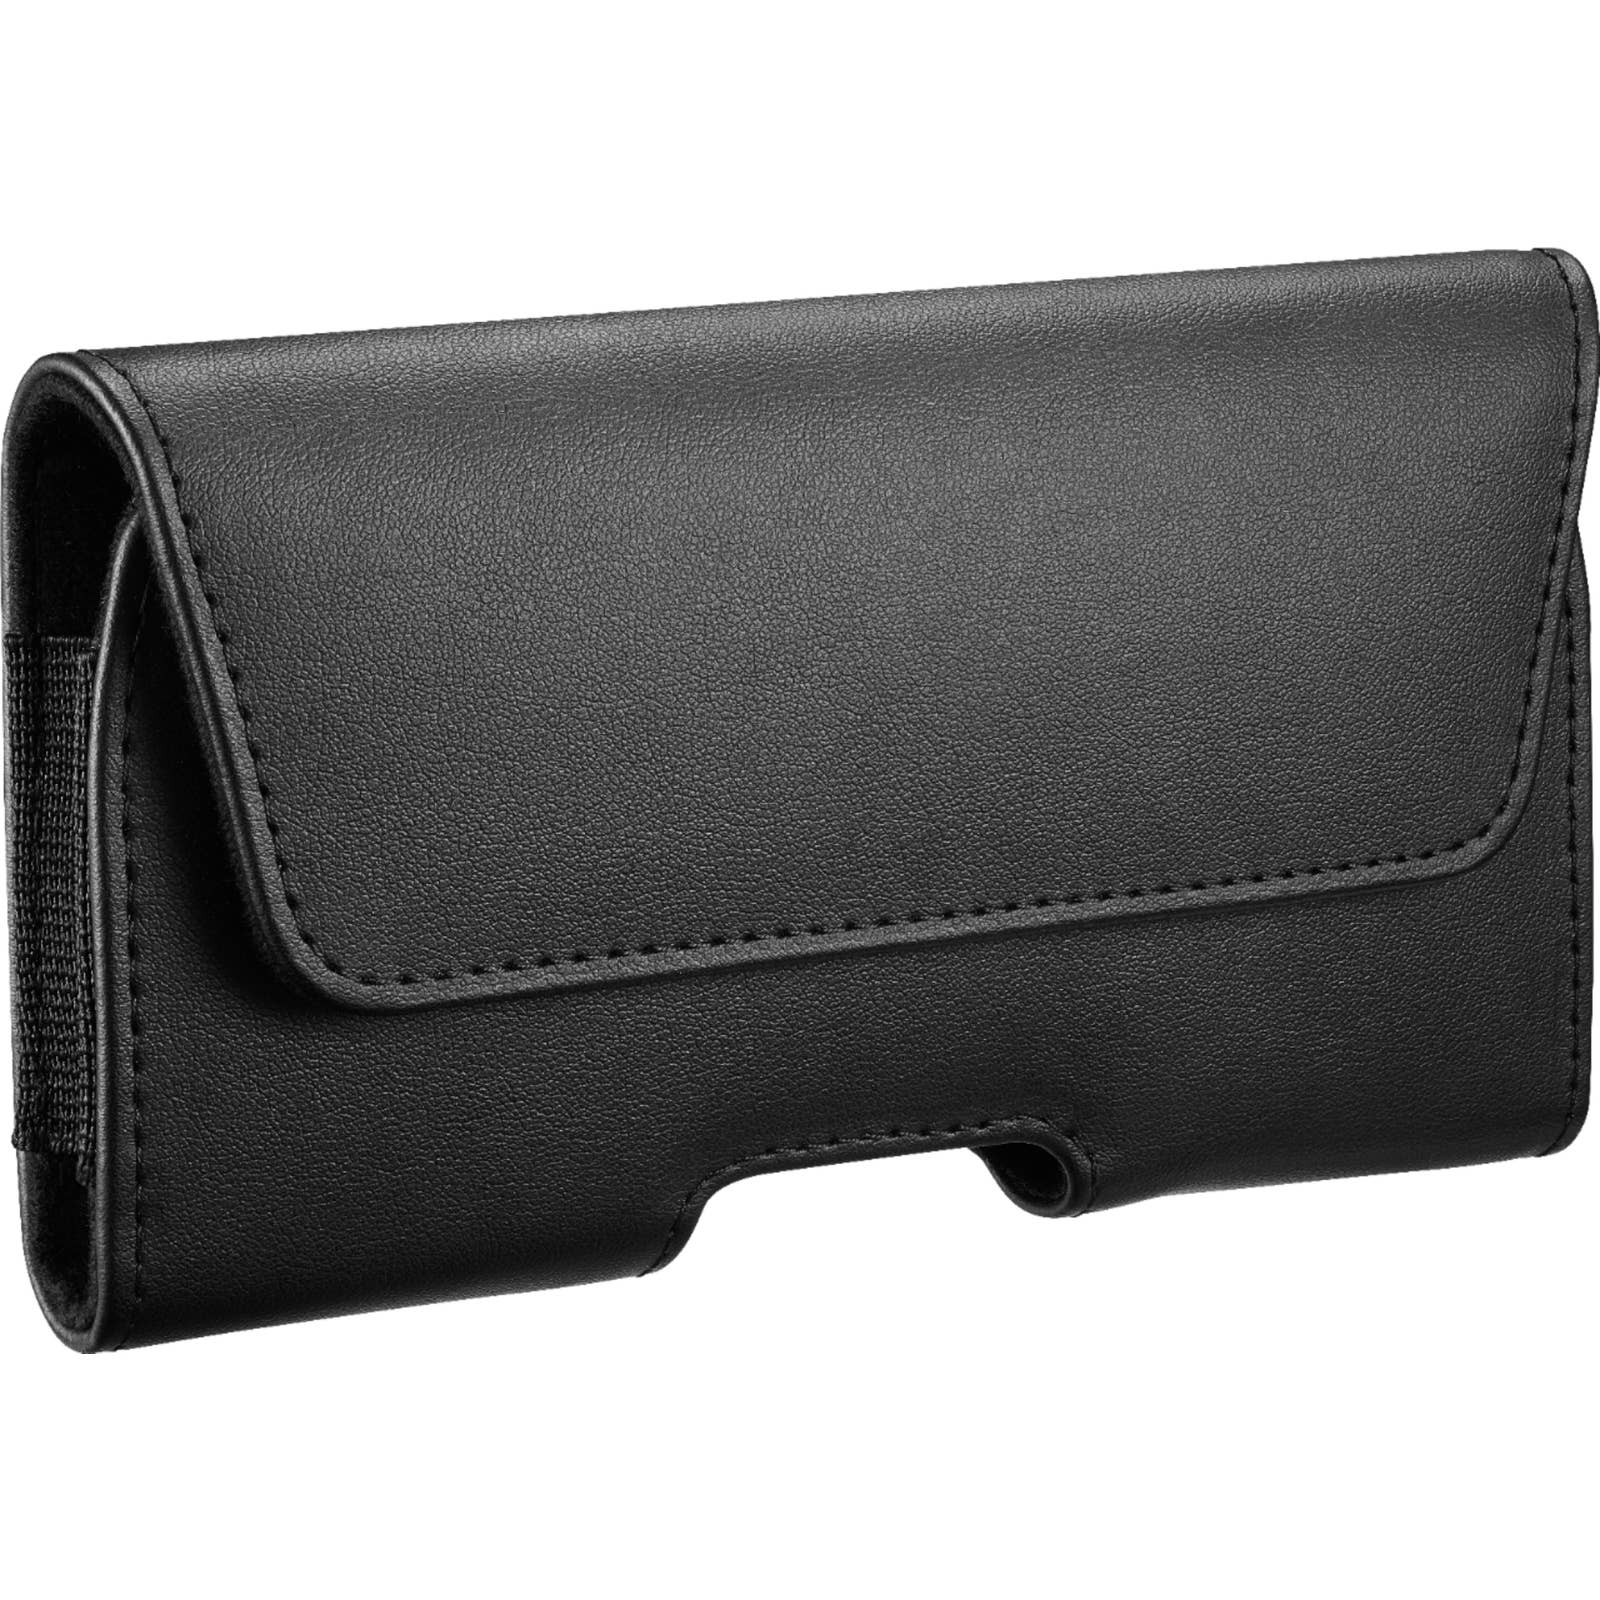 Insignia™ - NS-HPCS Universal Holster Case for Screens up to 6" - Black